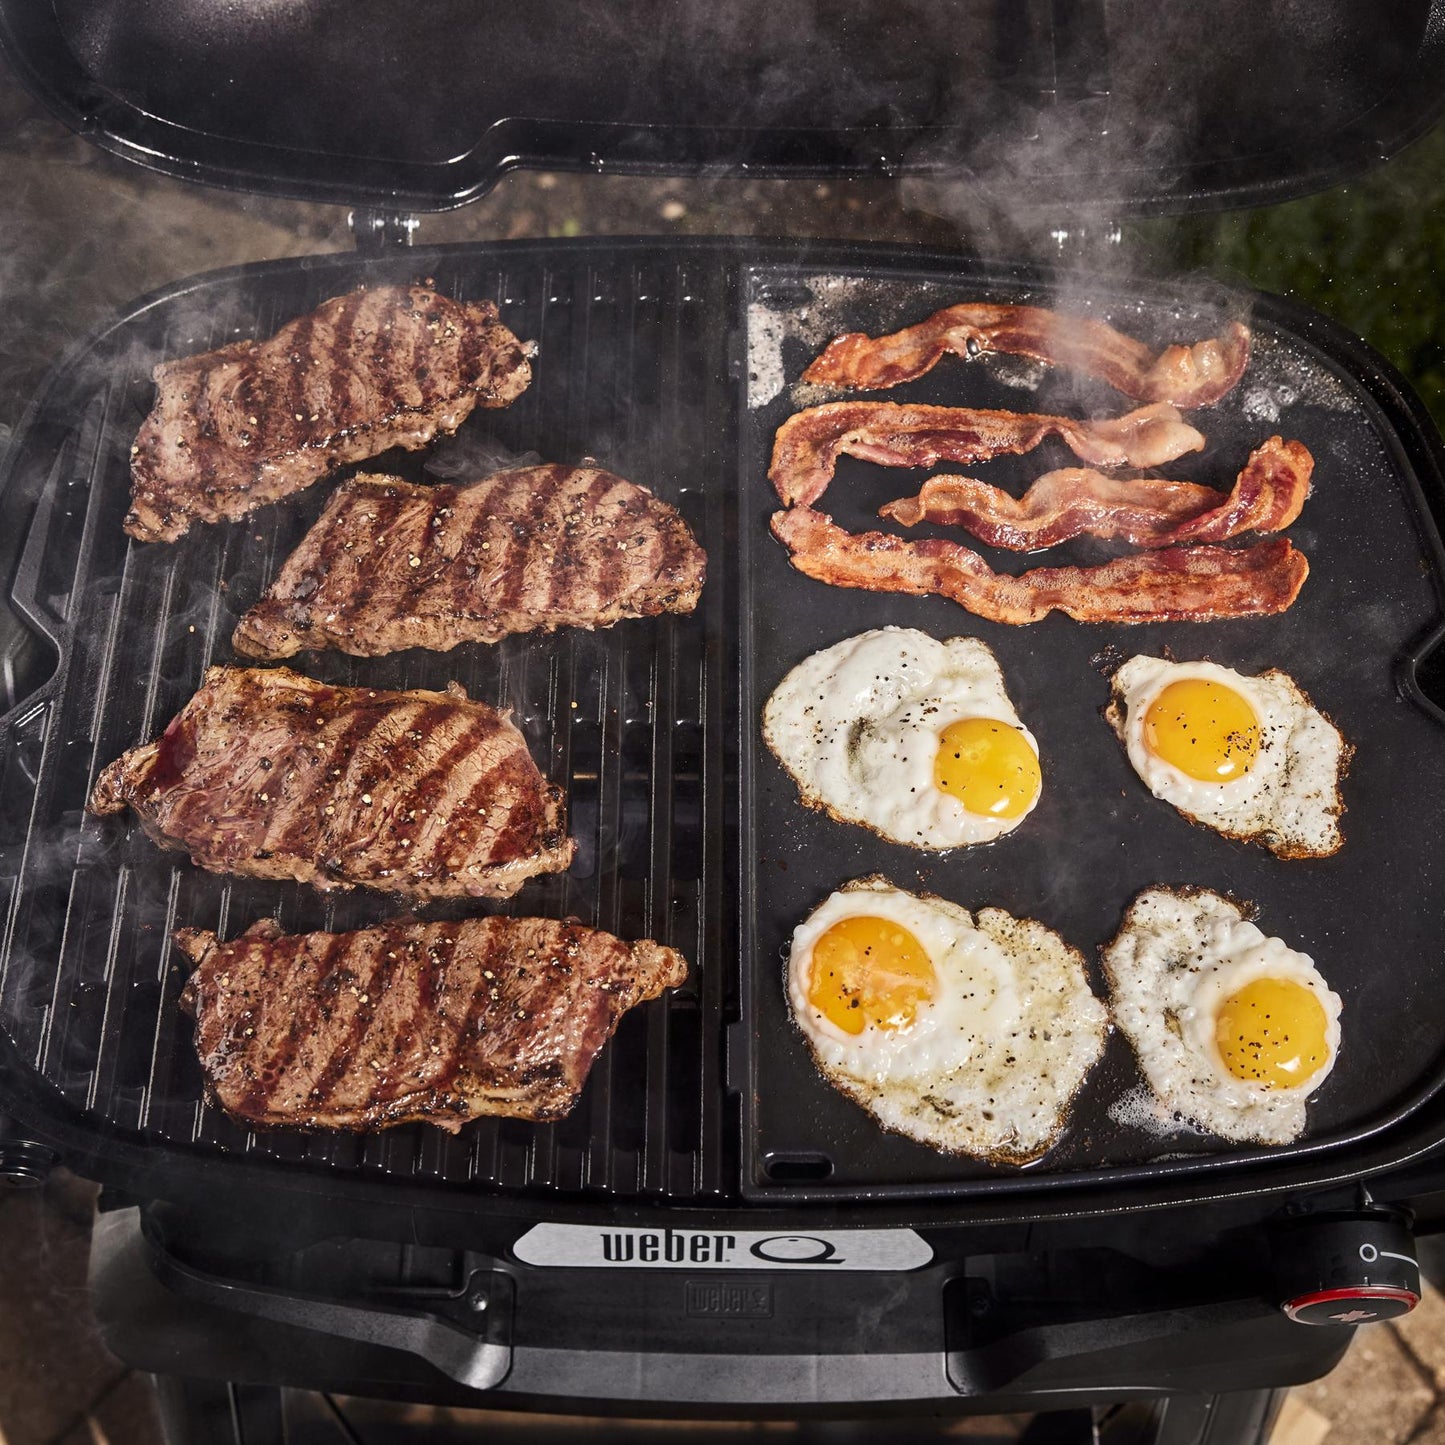 Weber 1500394 Q 2800N+ Gas Grill With Stand (Liquid Propane) - Sky Blue